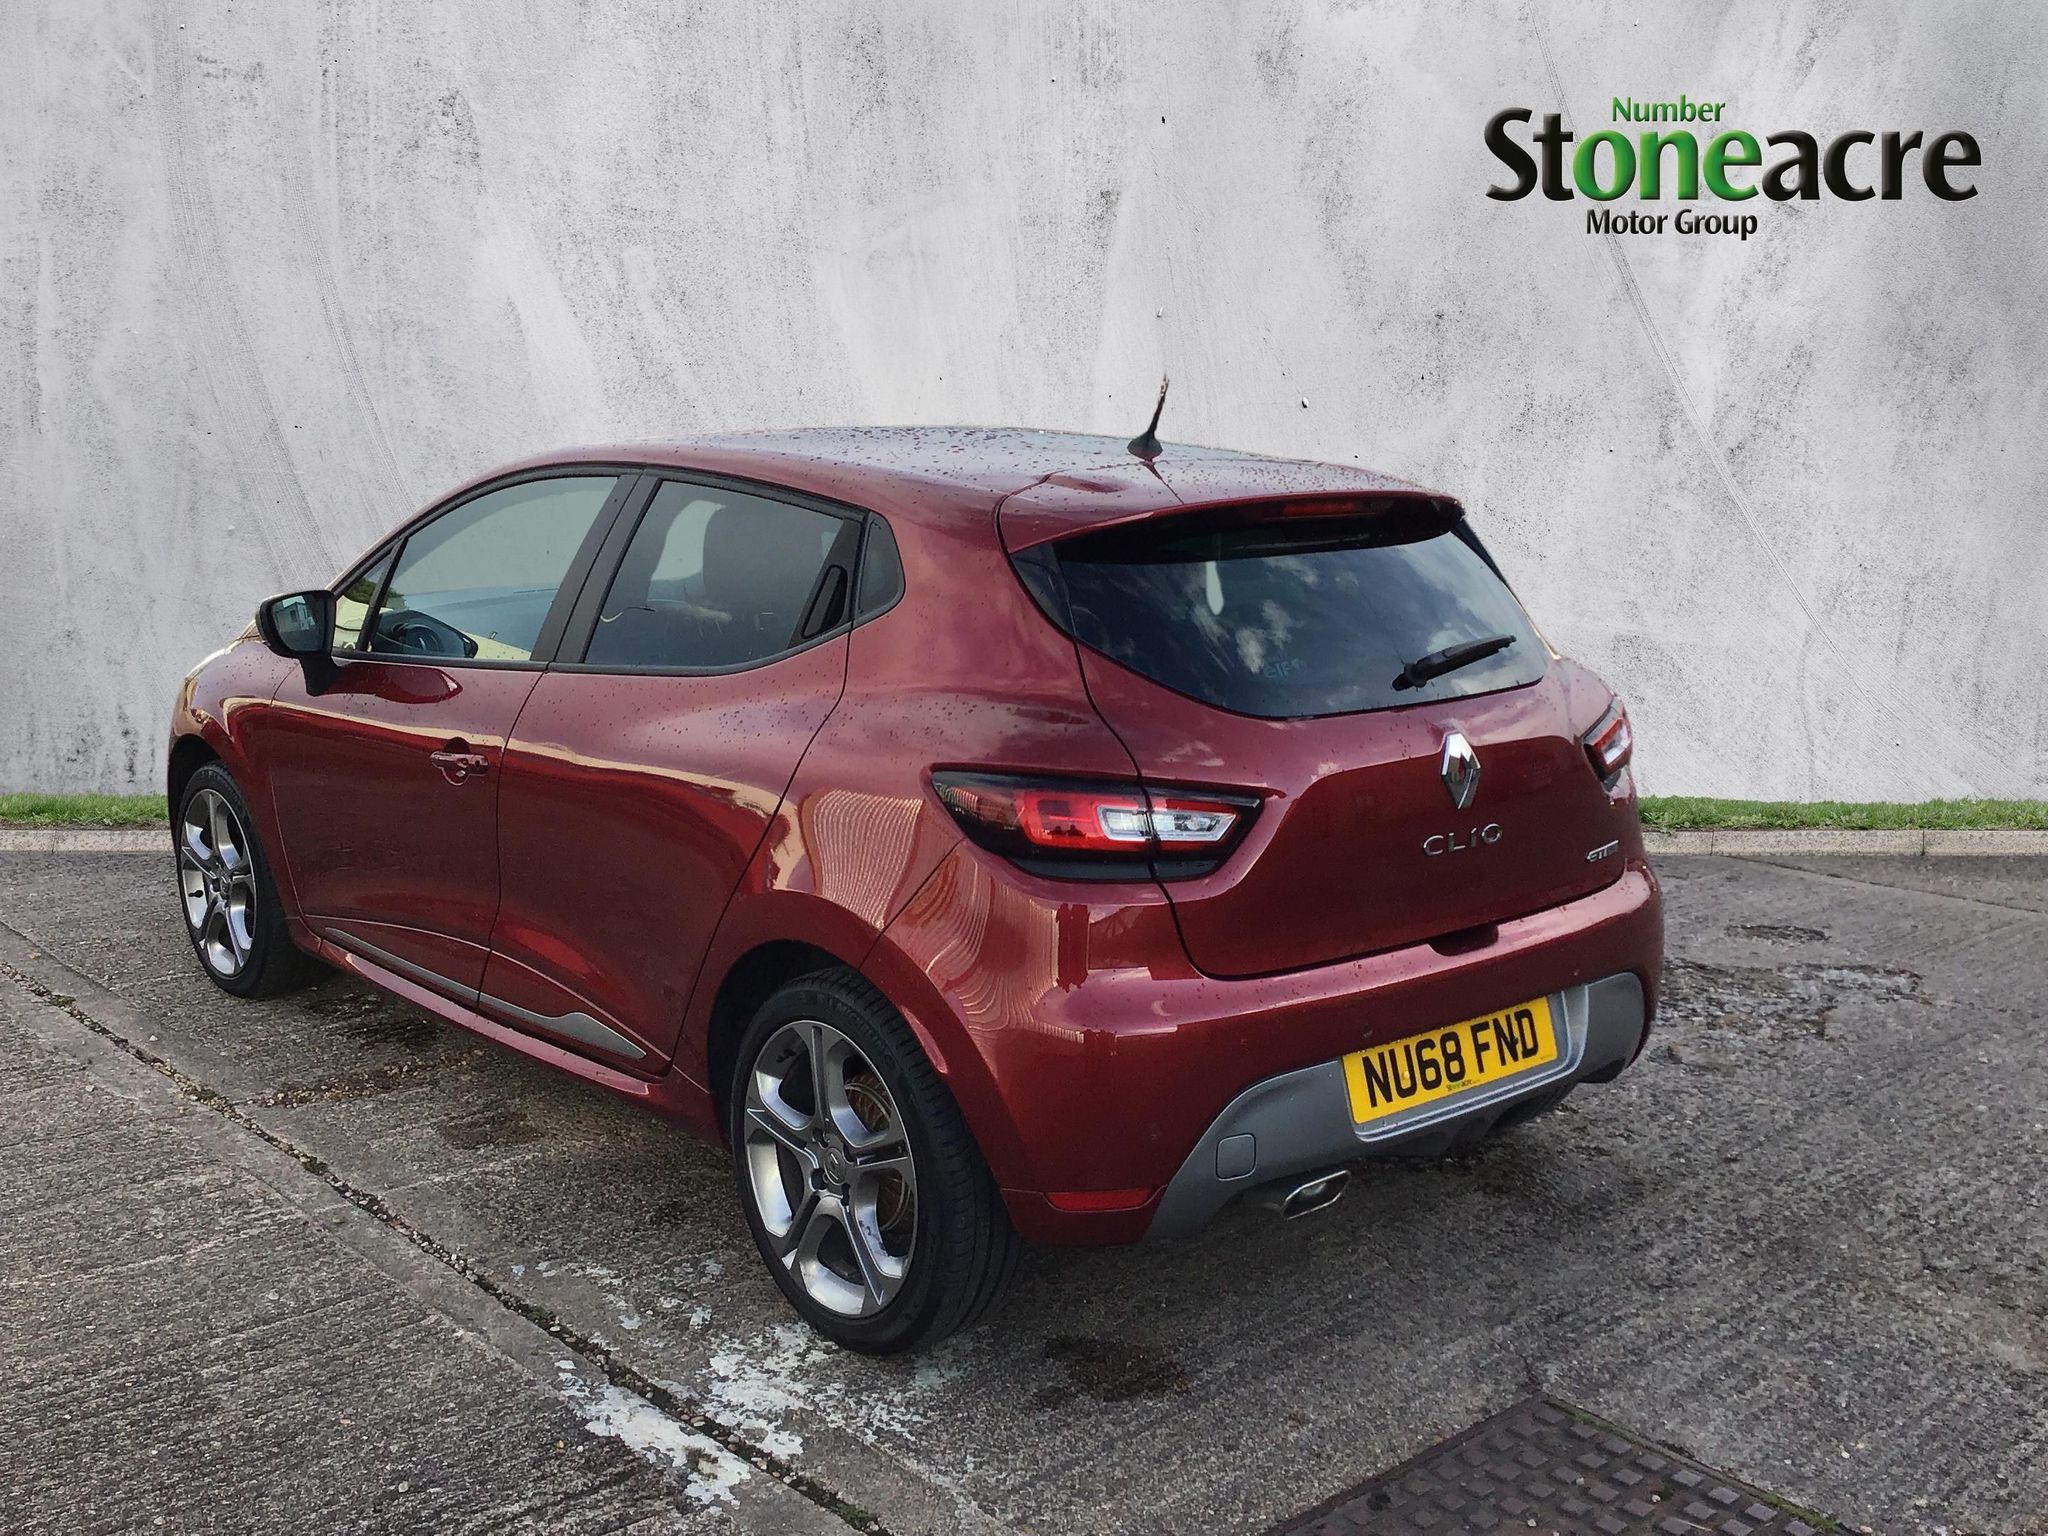 Used Renault Clio 1.5 dCi 90 GT Line 5dr (NU68FND) Stoneacre